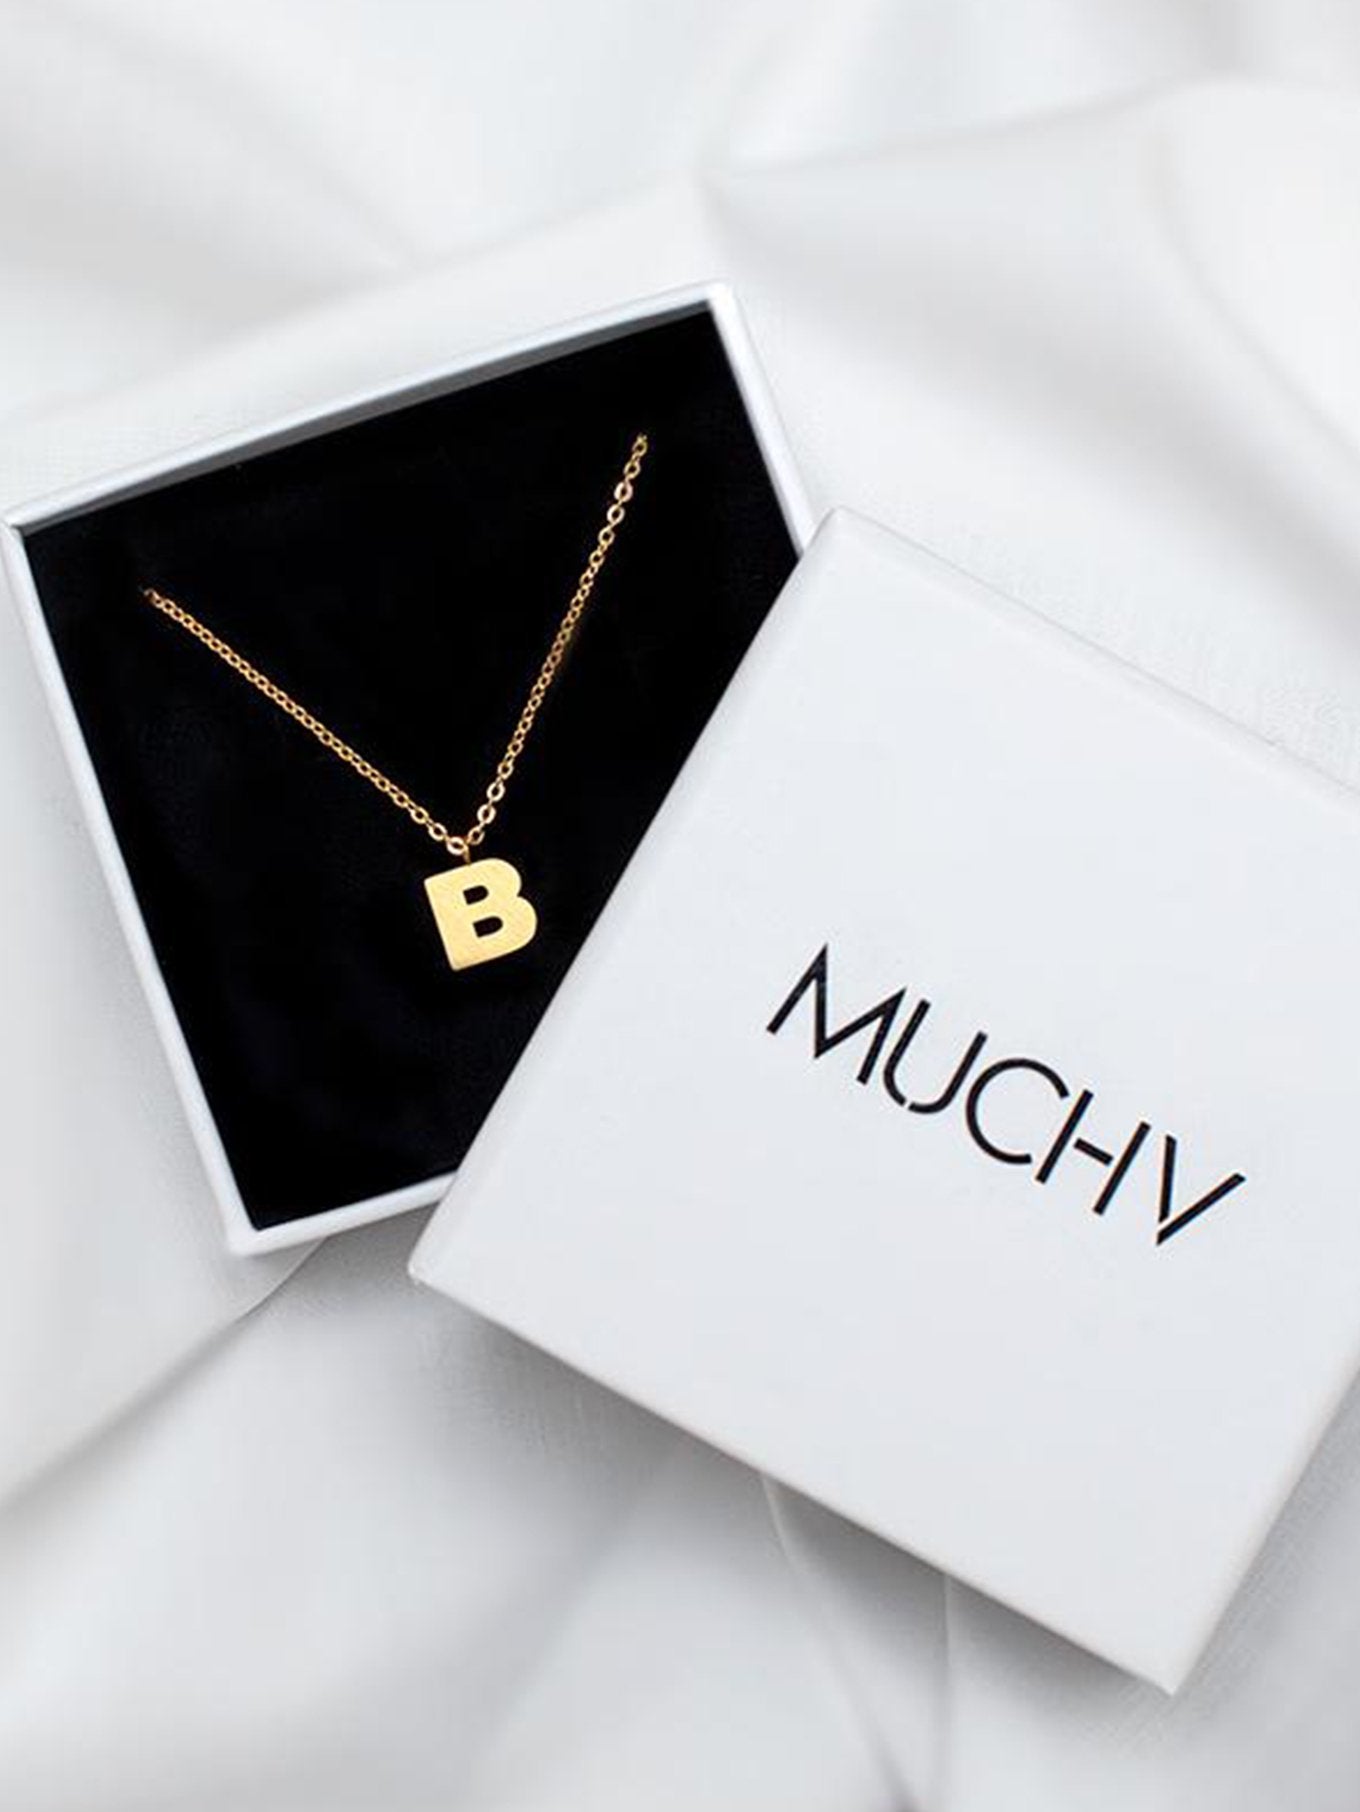 Gold Initial Pendant Necklace inside a white gift box.